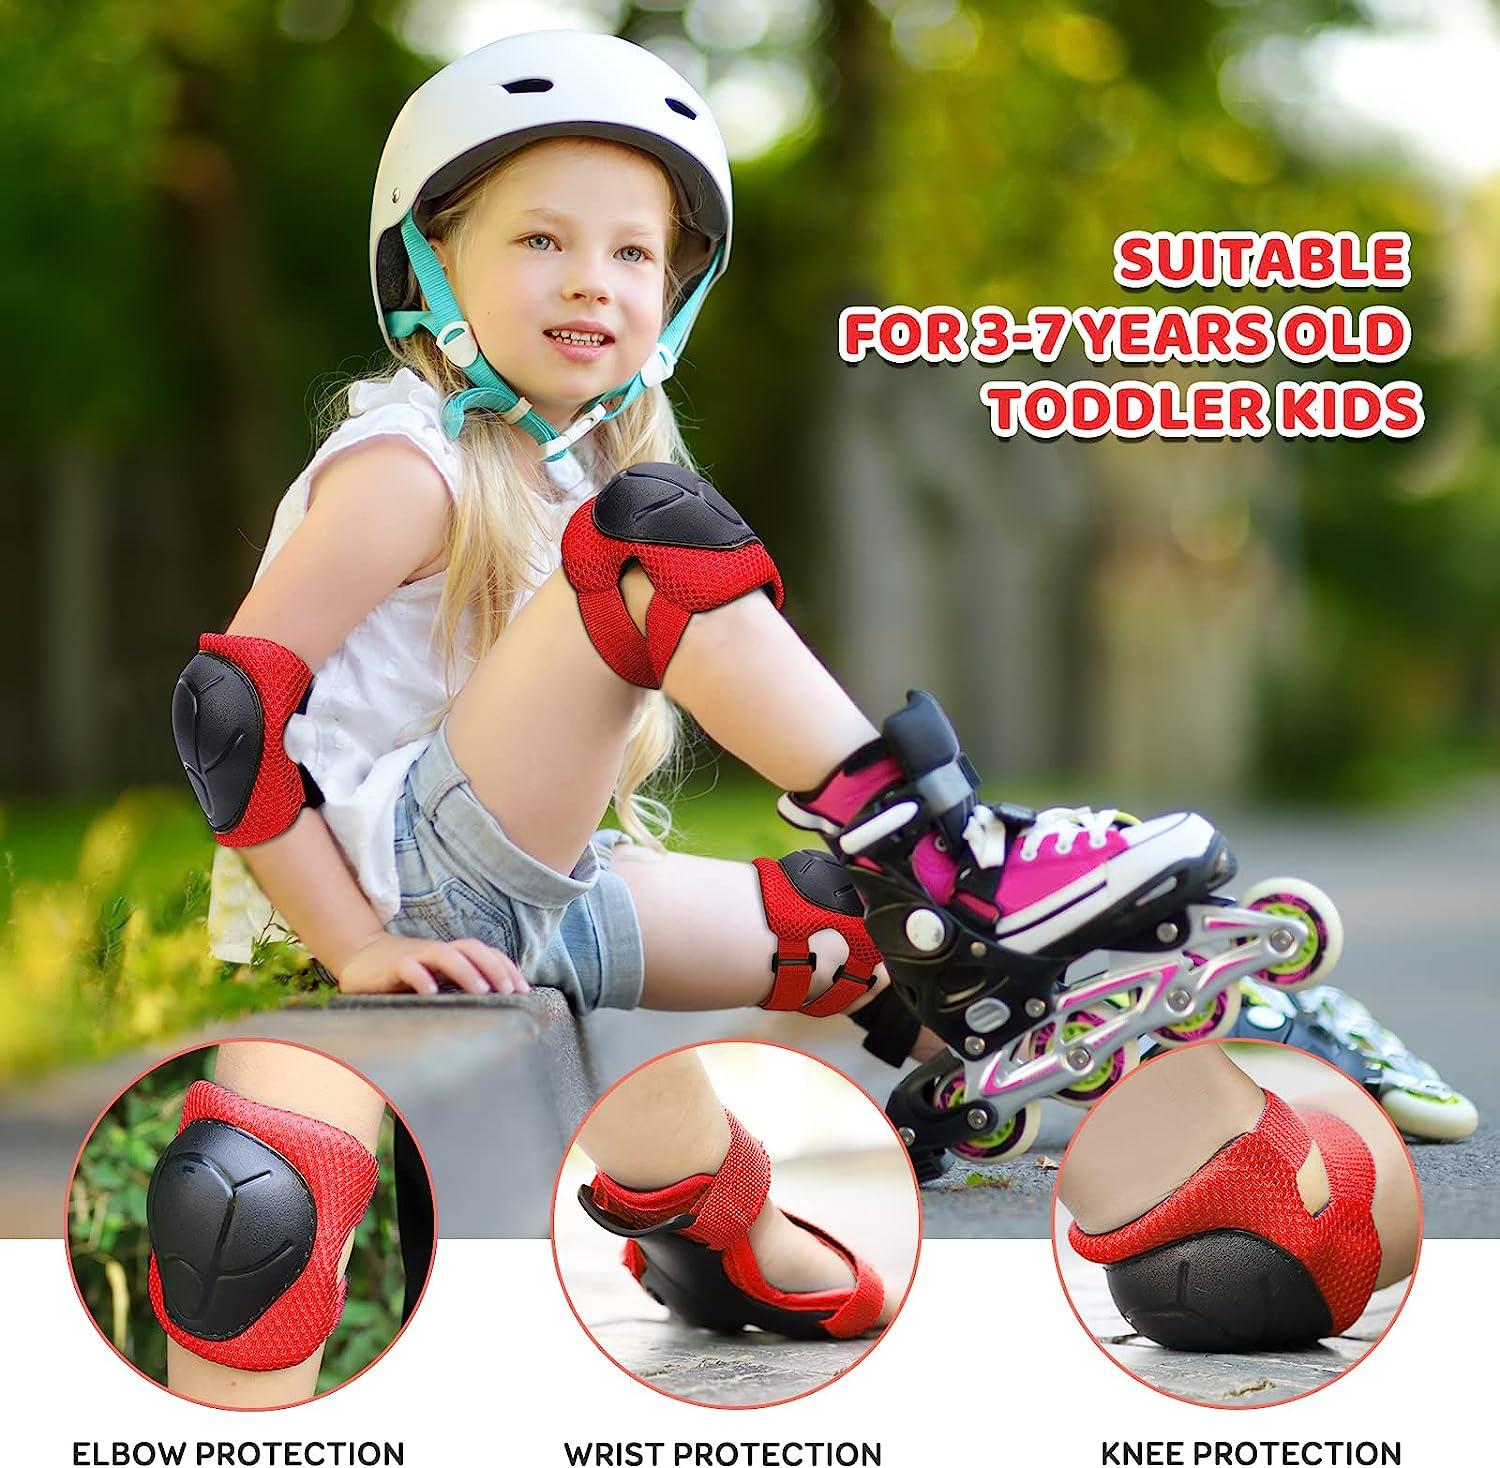 KUYOU Safety Gear for Kids 6-13 Years Old, Kids Youth Knee Pad Elbow Pads  Wrist Guards 3 in 1 Adjustable Protective Gear Set for Roller Skating